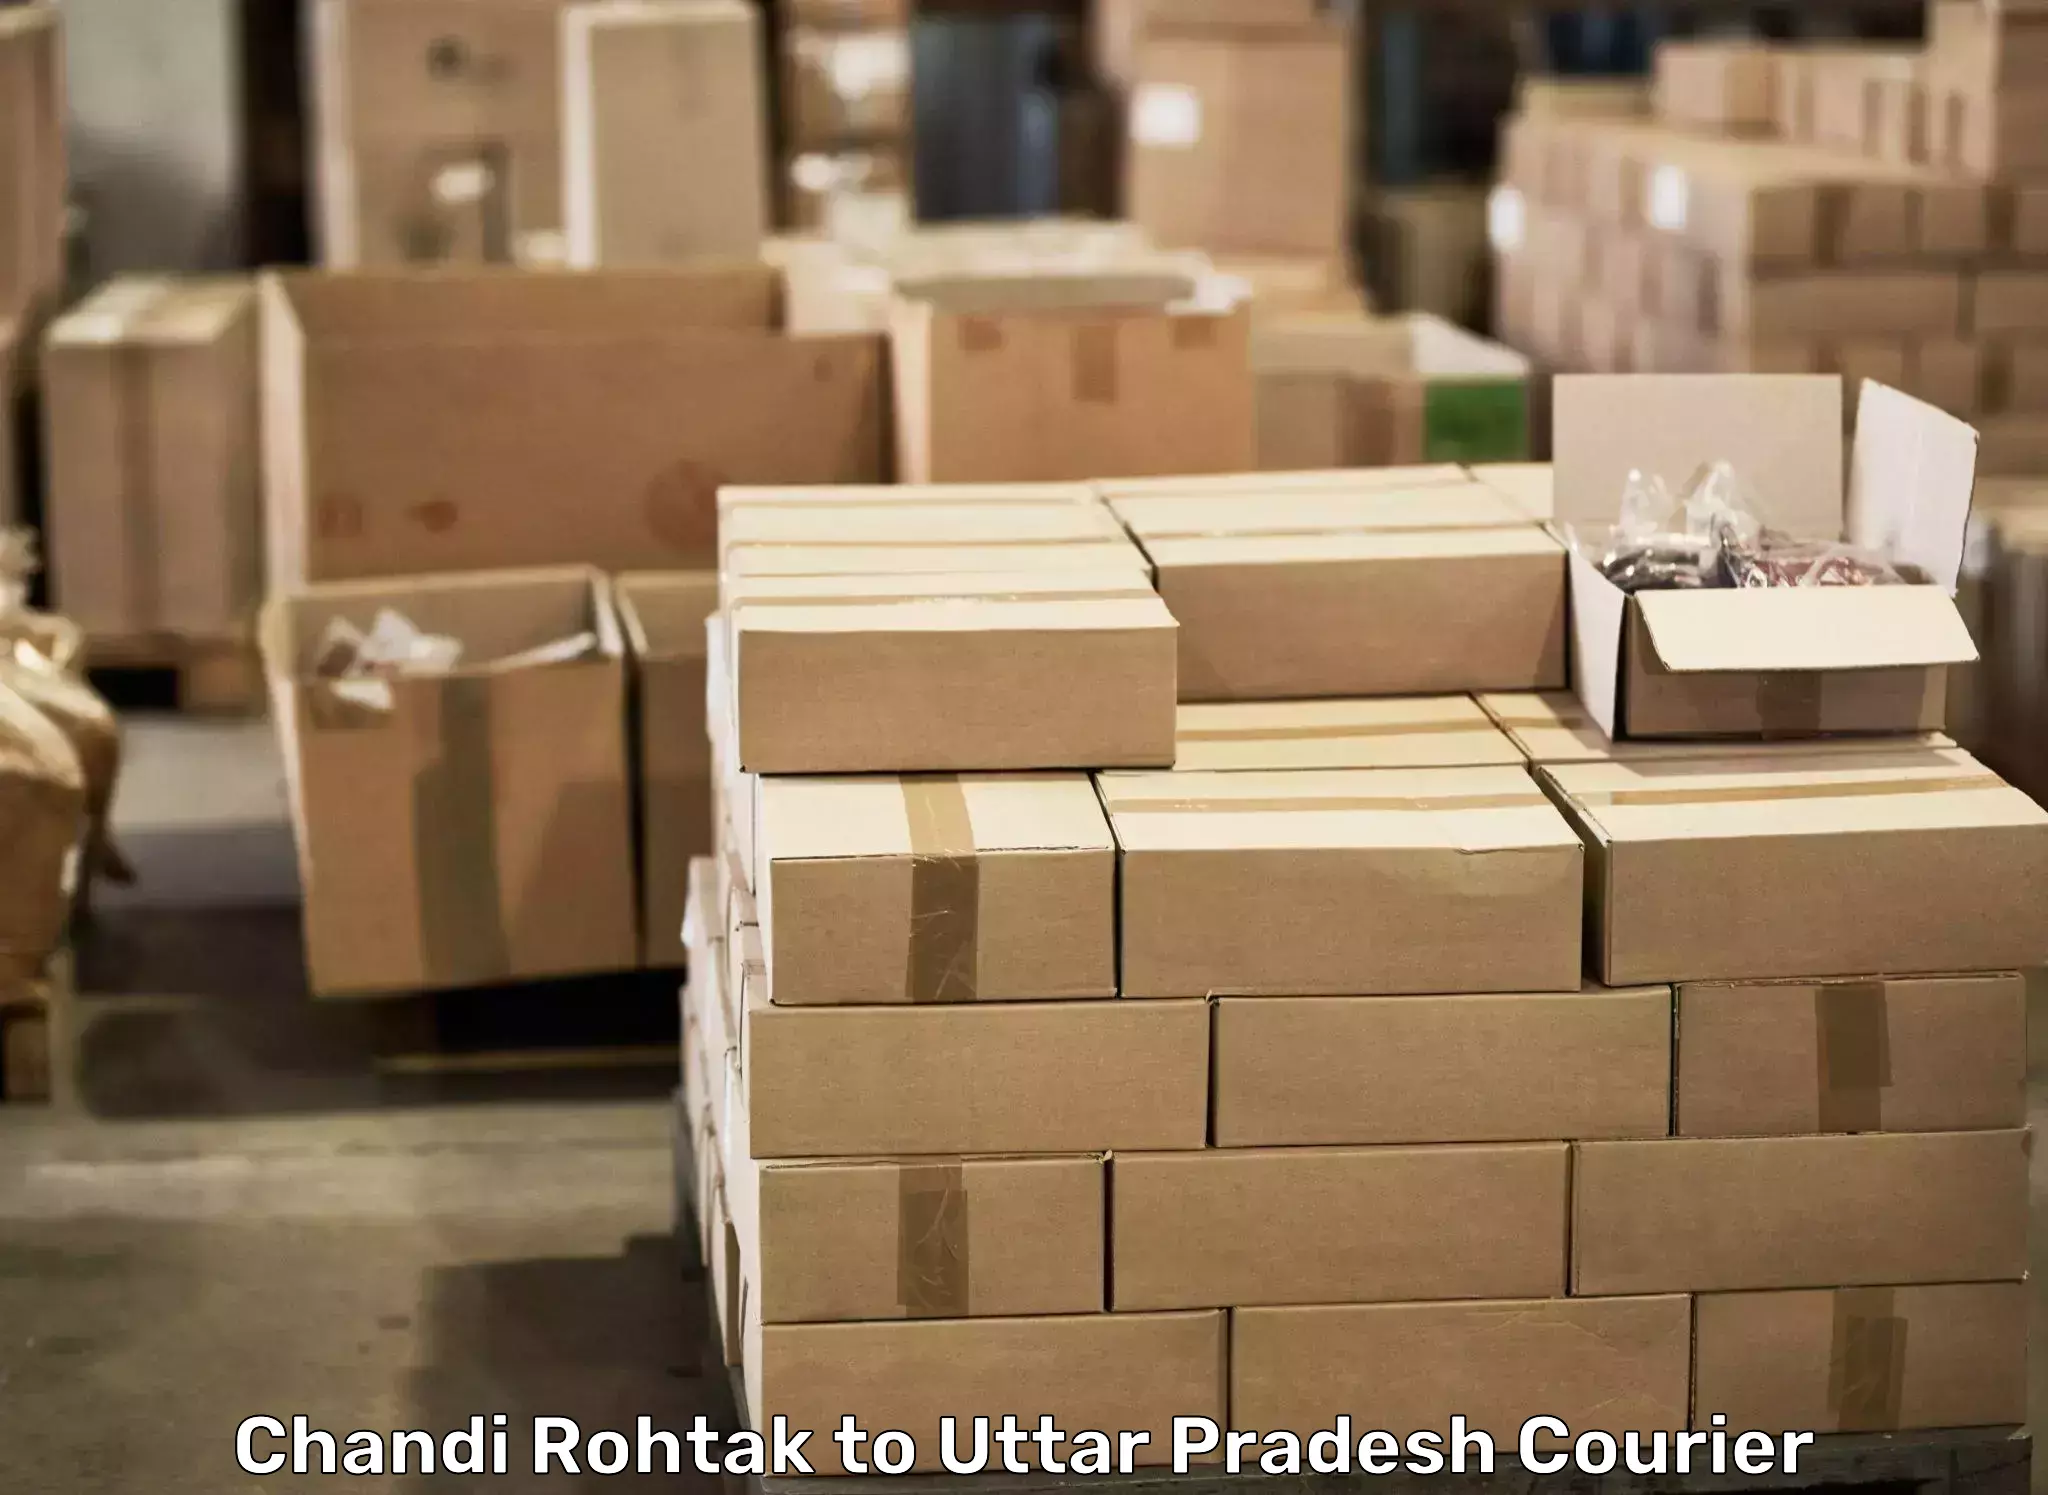 Professional home movers in Chandi Rohtak to Kanpur